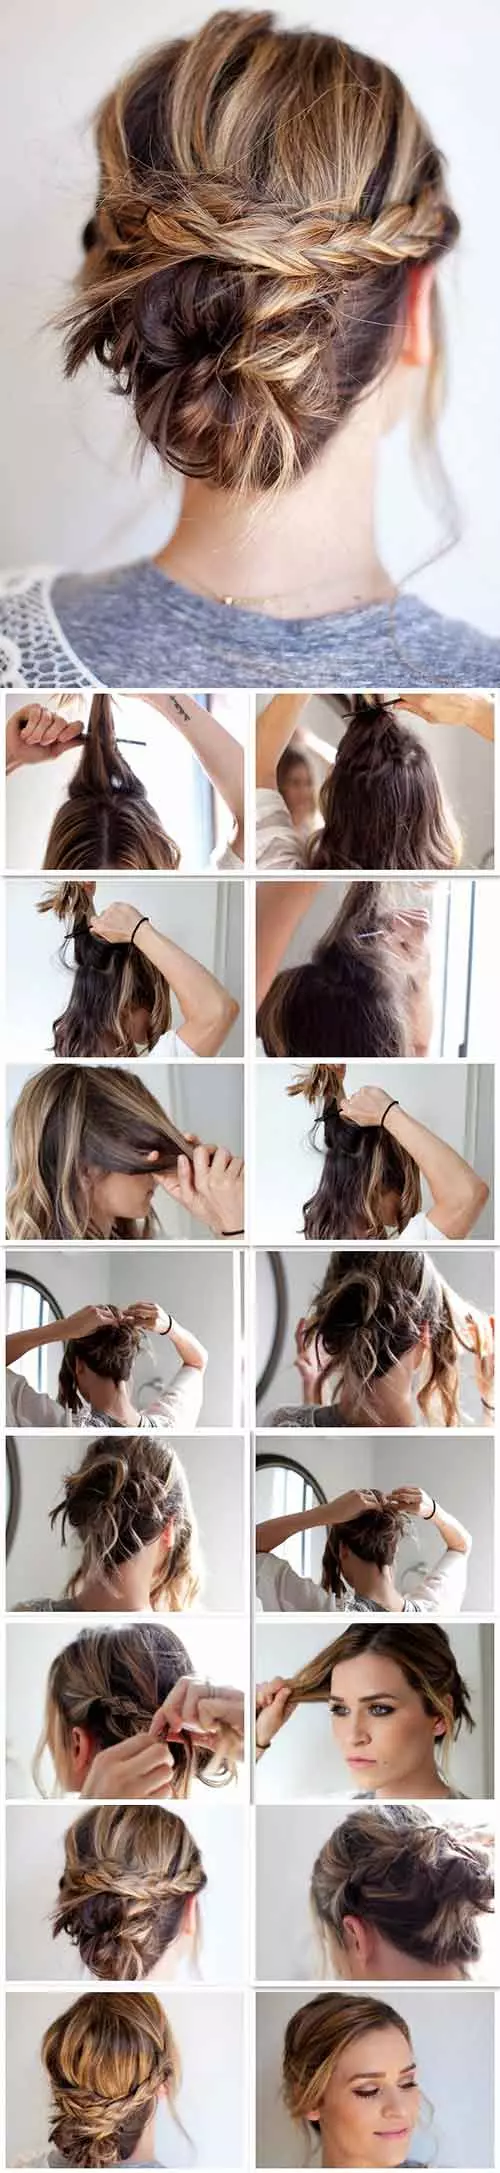 The perfect messy updo diy short hairstyle